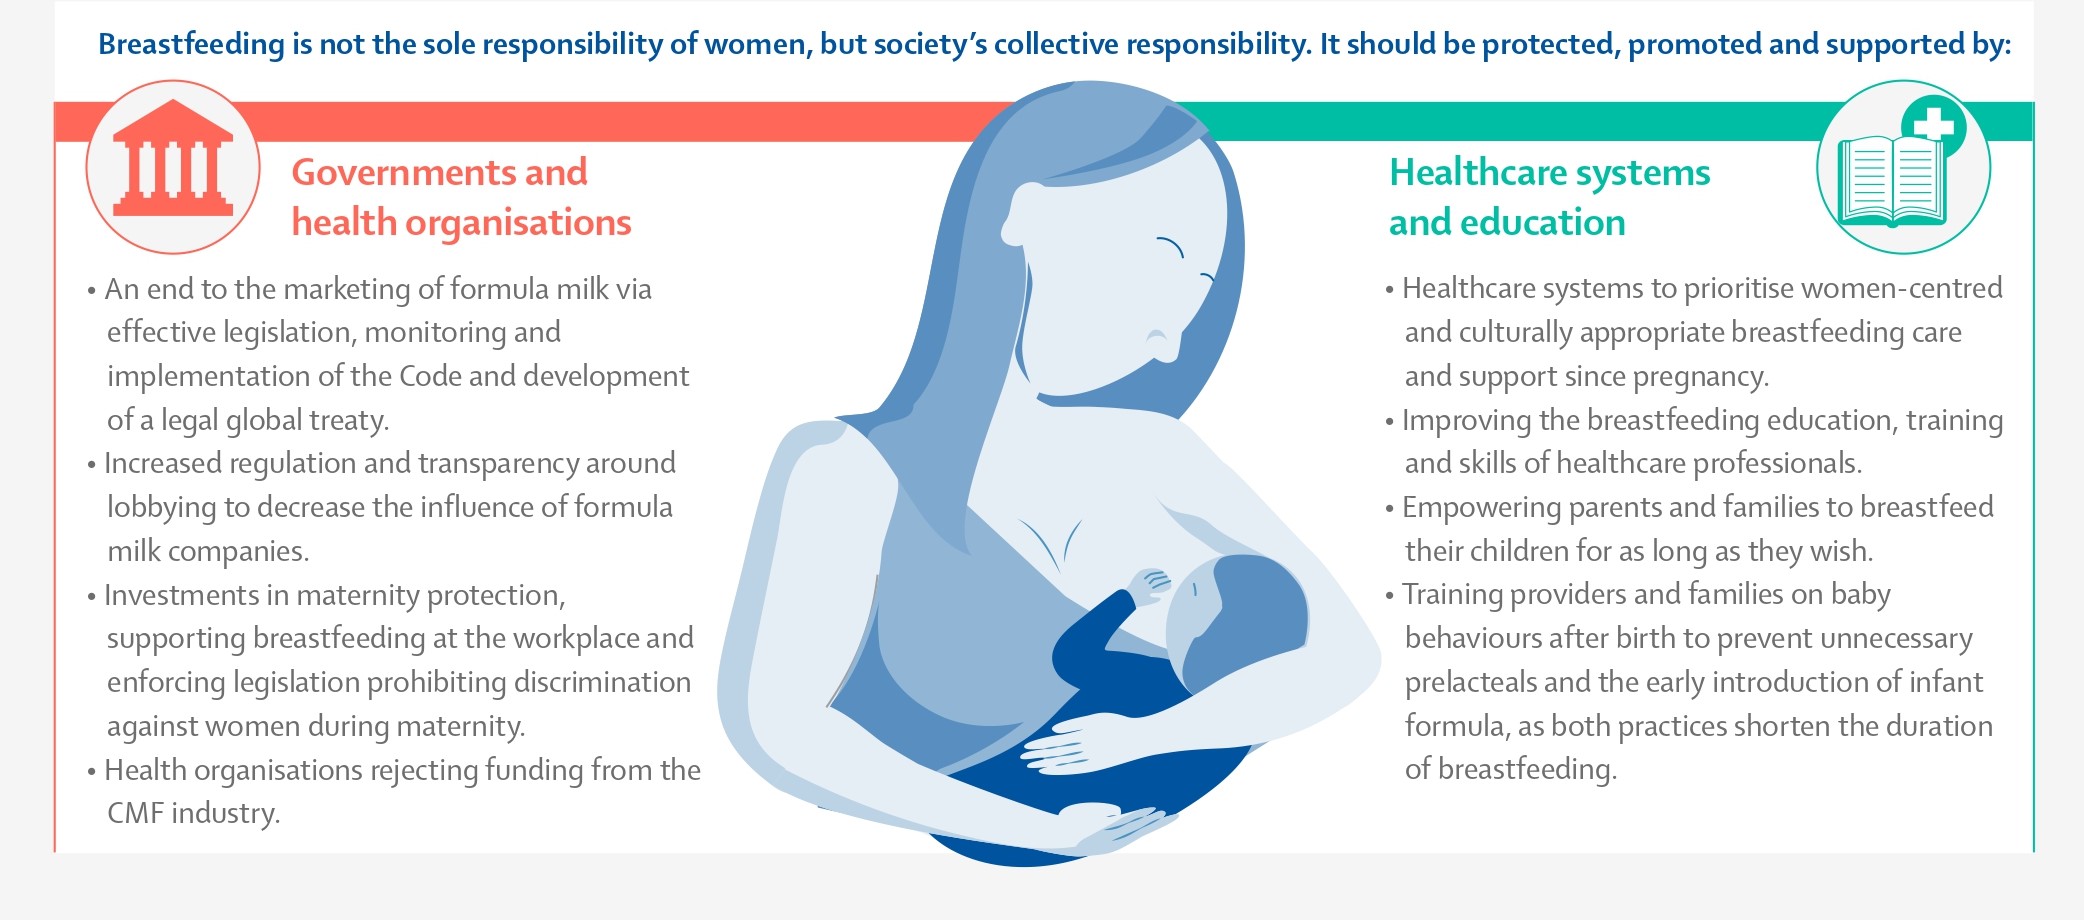 Alt text: link to The 2023 Lancet Series on Breastfeeding: infographics -&nbsp;https://www.thelancet.com/infographics-do/2023-lancet-series-breastfeeding